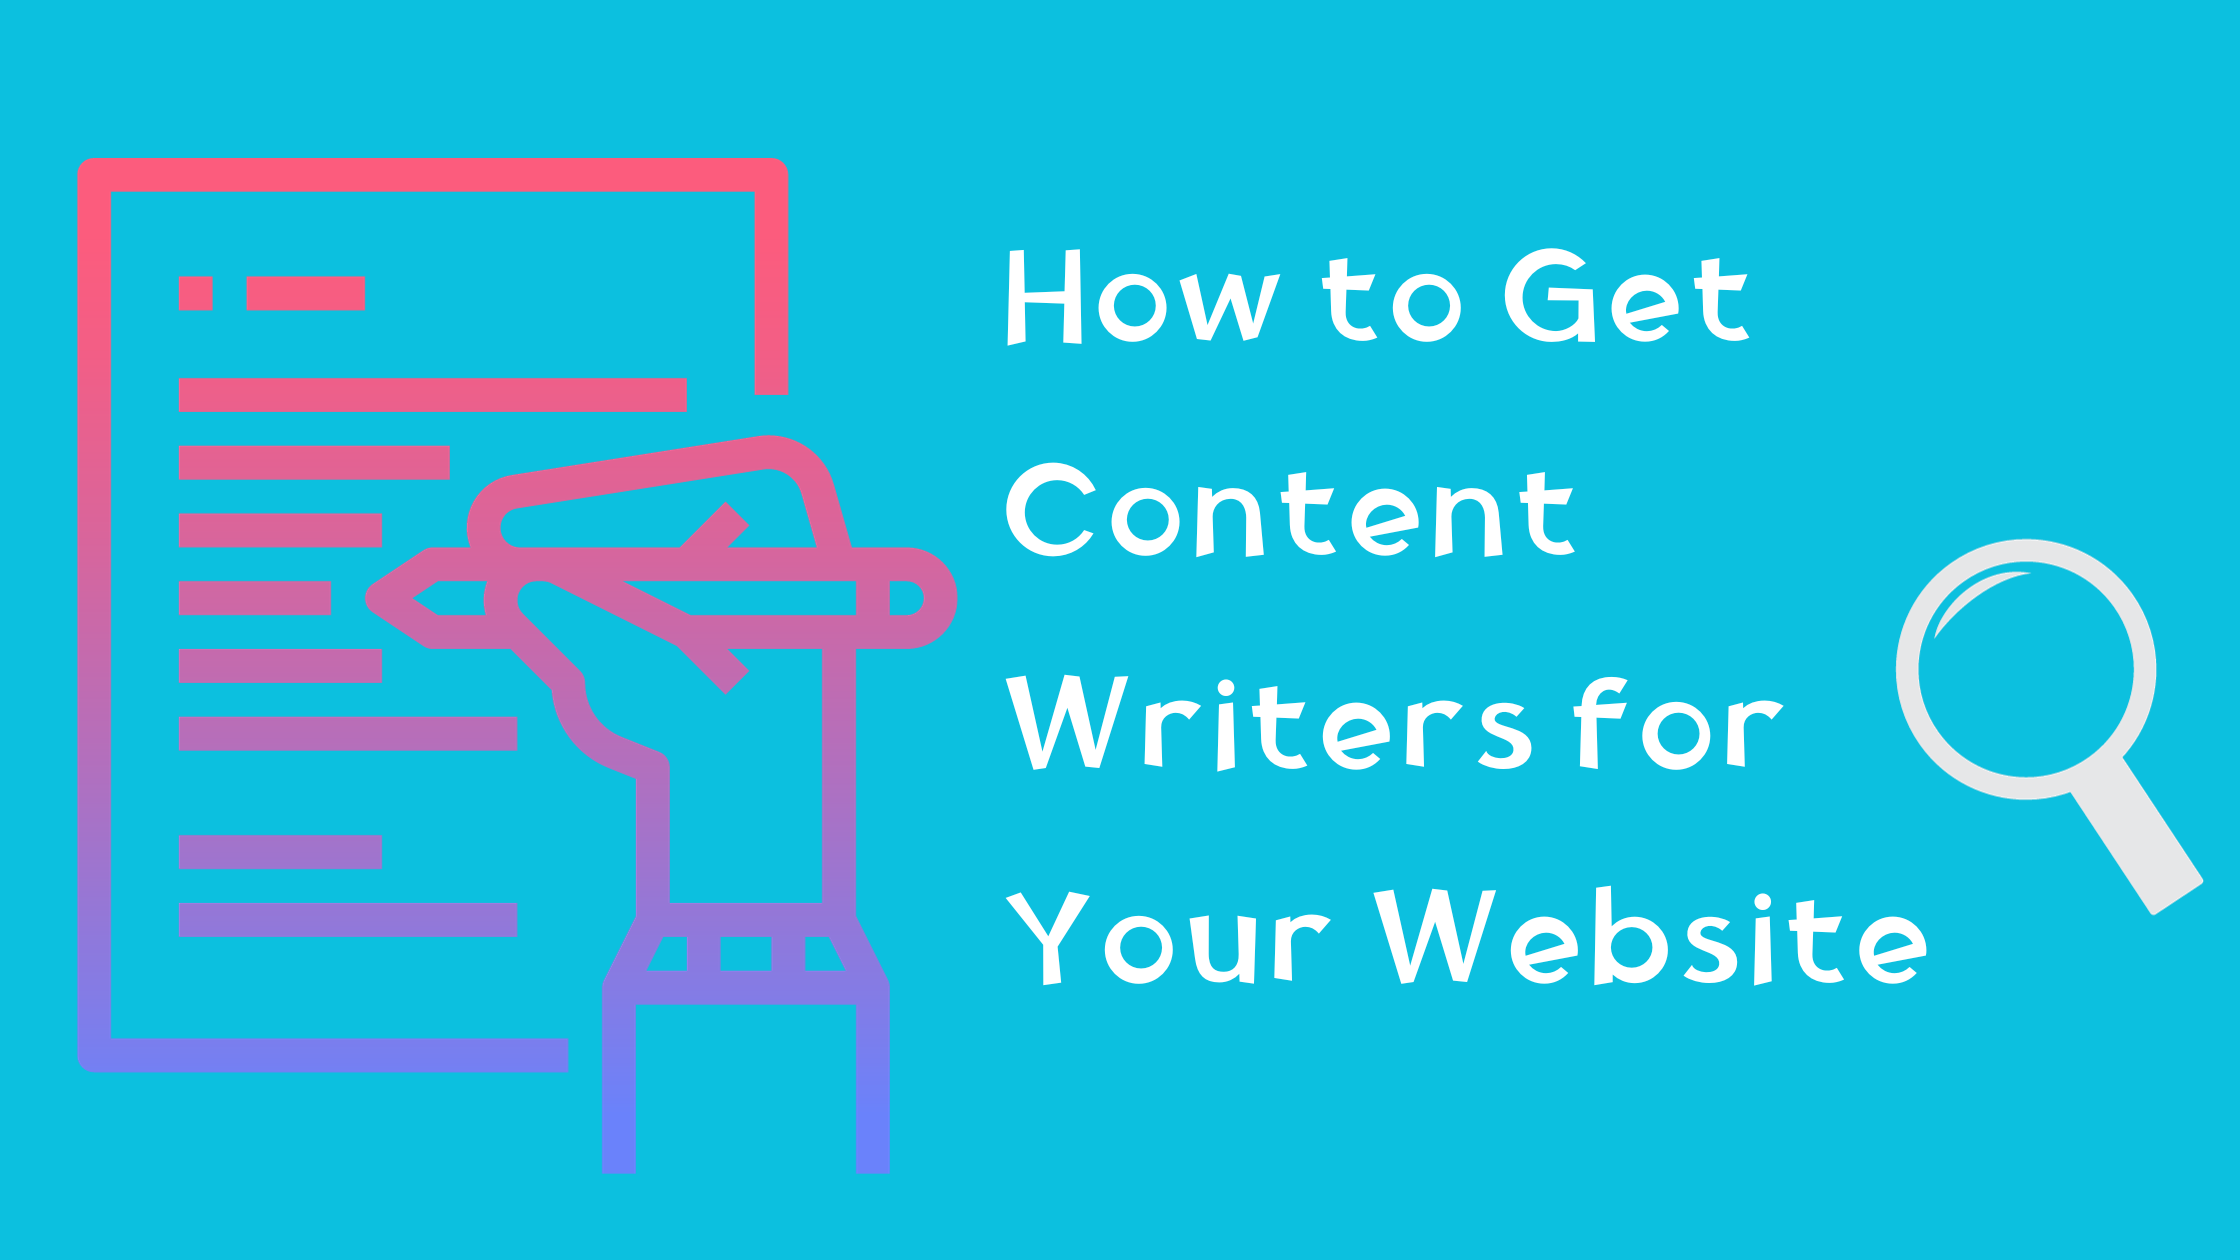 How to Get Content Writers for Your Website